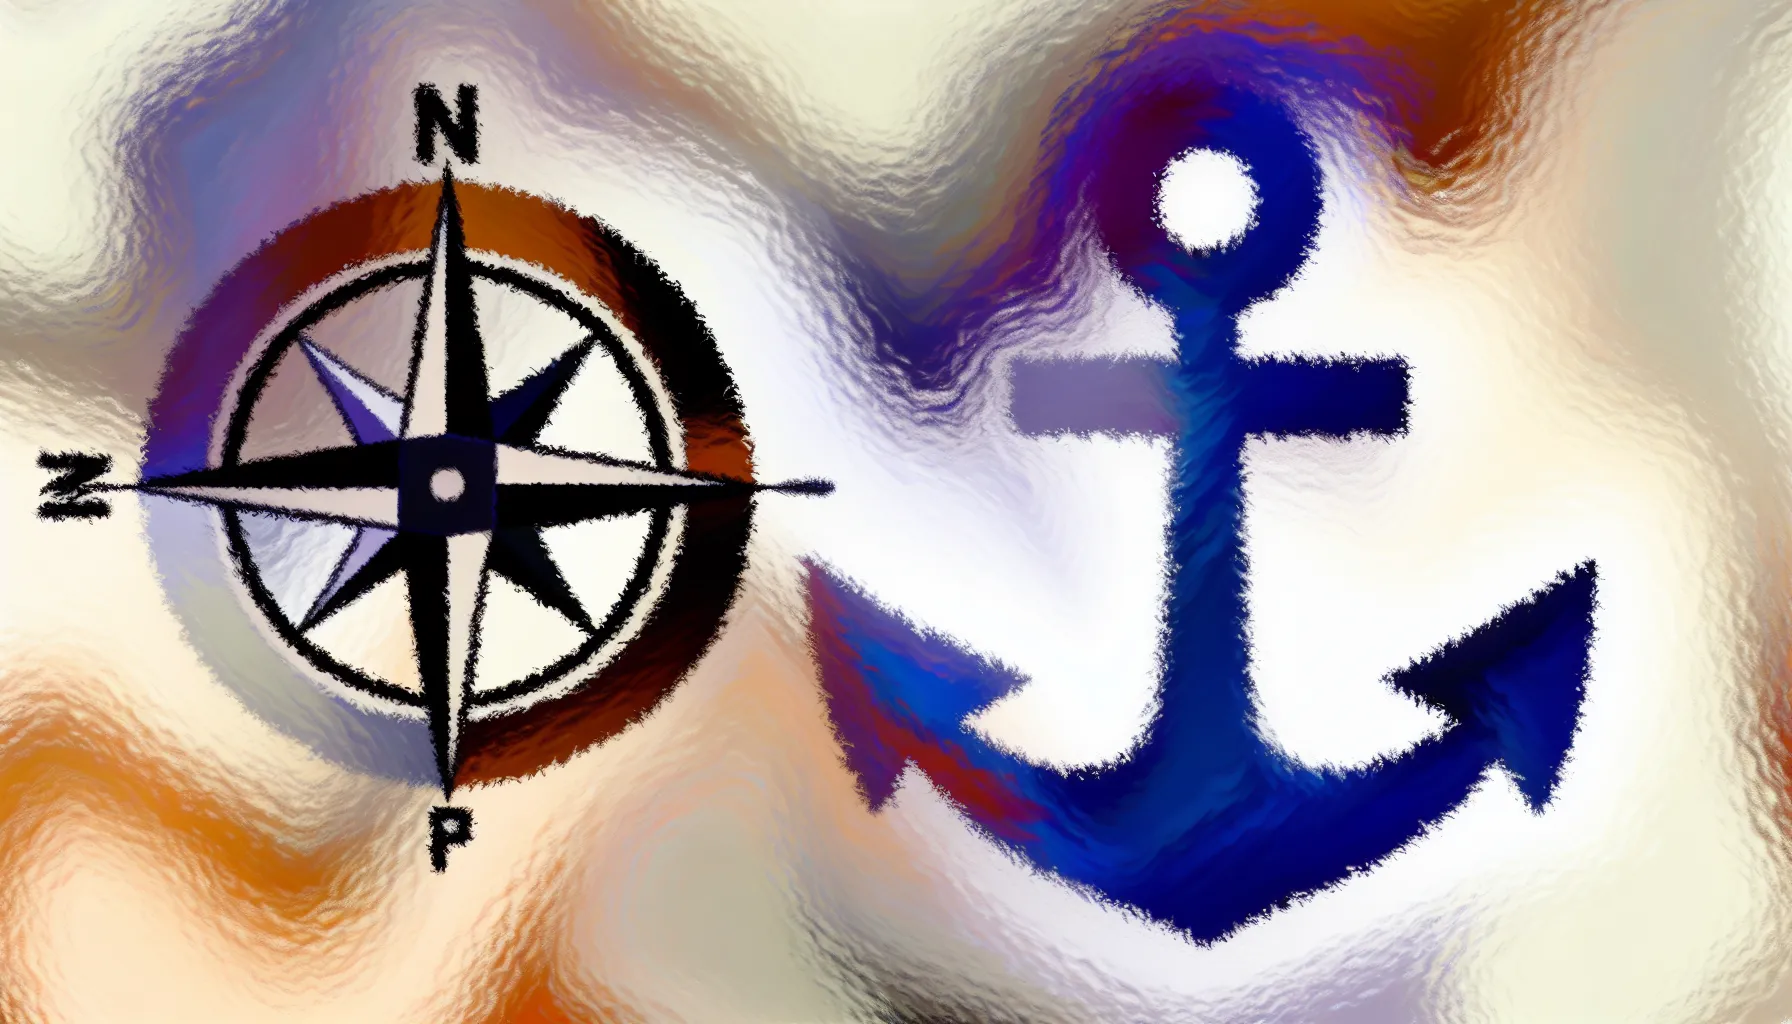 Compass and Anchor - Symbols of Understanding and Growth